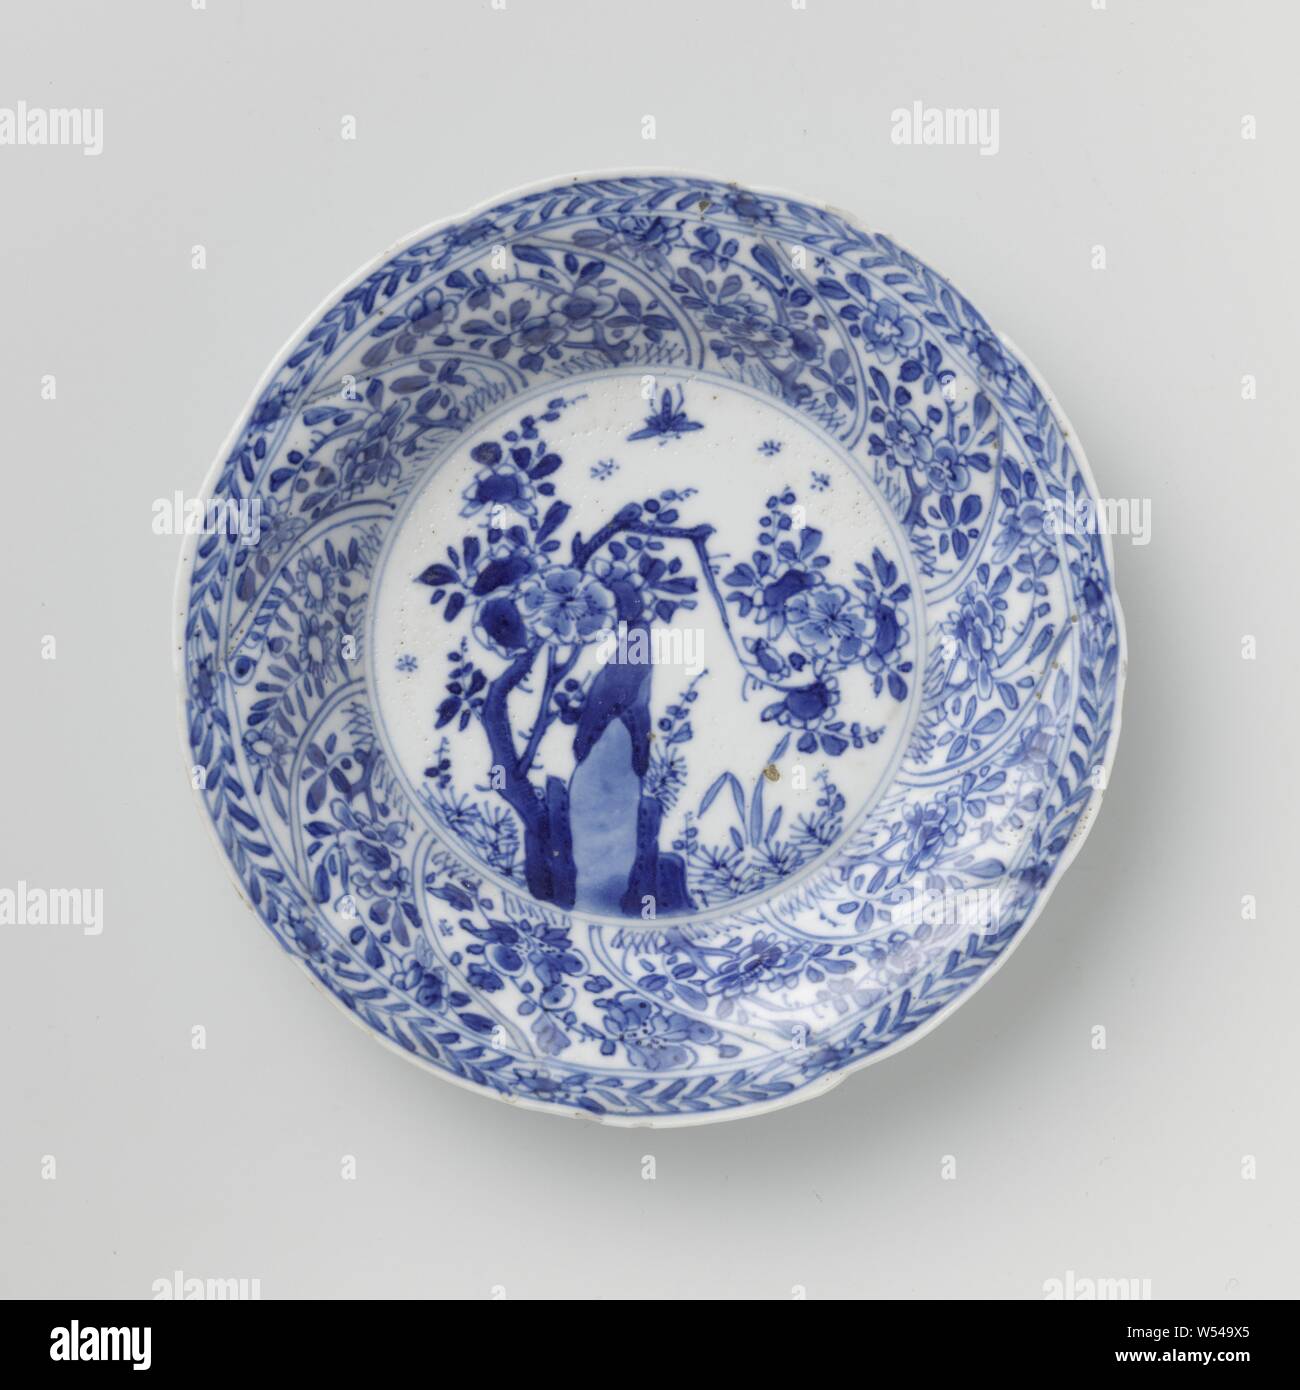 Saucer with twisted panels and flower sprays, Porcelain dish with round wall modeled in ten twisted boxes, painted in underglaze blue. On the flat a rock with a flower branch, plants and butterfly, a flower branch on the wall in each compartment, the border with a flower vine, on the back also a flower branch in each compartment. Marked on the bottom with the Chinese character 'Fú' in a double circle. A few chips in the edge. Blue White., Fú’, anonymous, China, c. 1680 - c. 1720, Qing-dynasty (1644-1912) / Kangxi-period (1662-1722), porcelain (material), glaze, cobalt (mineral), vitrification Stock Photo